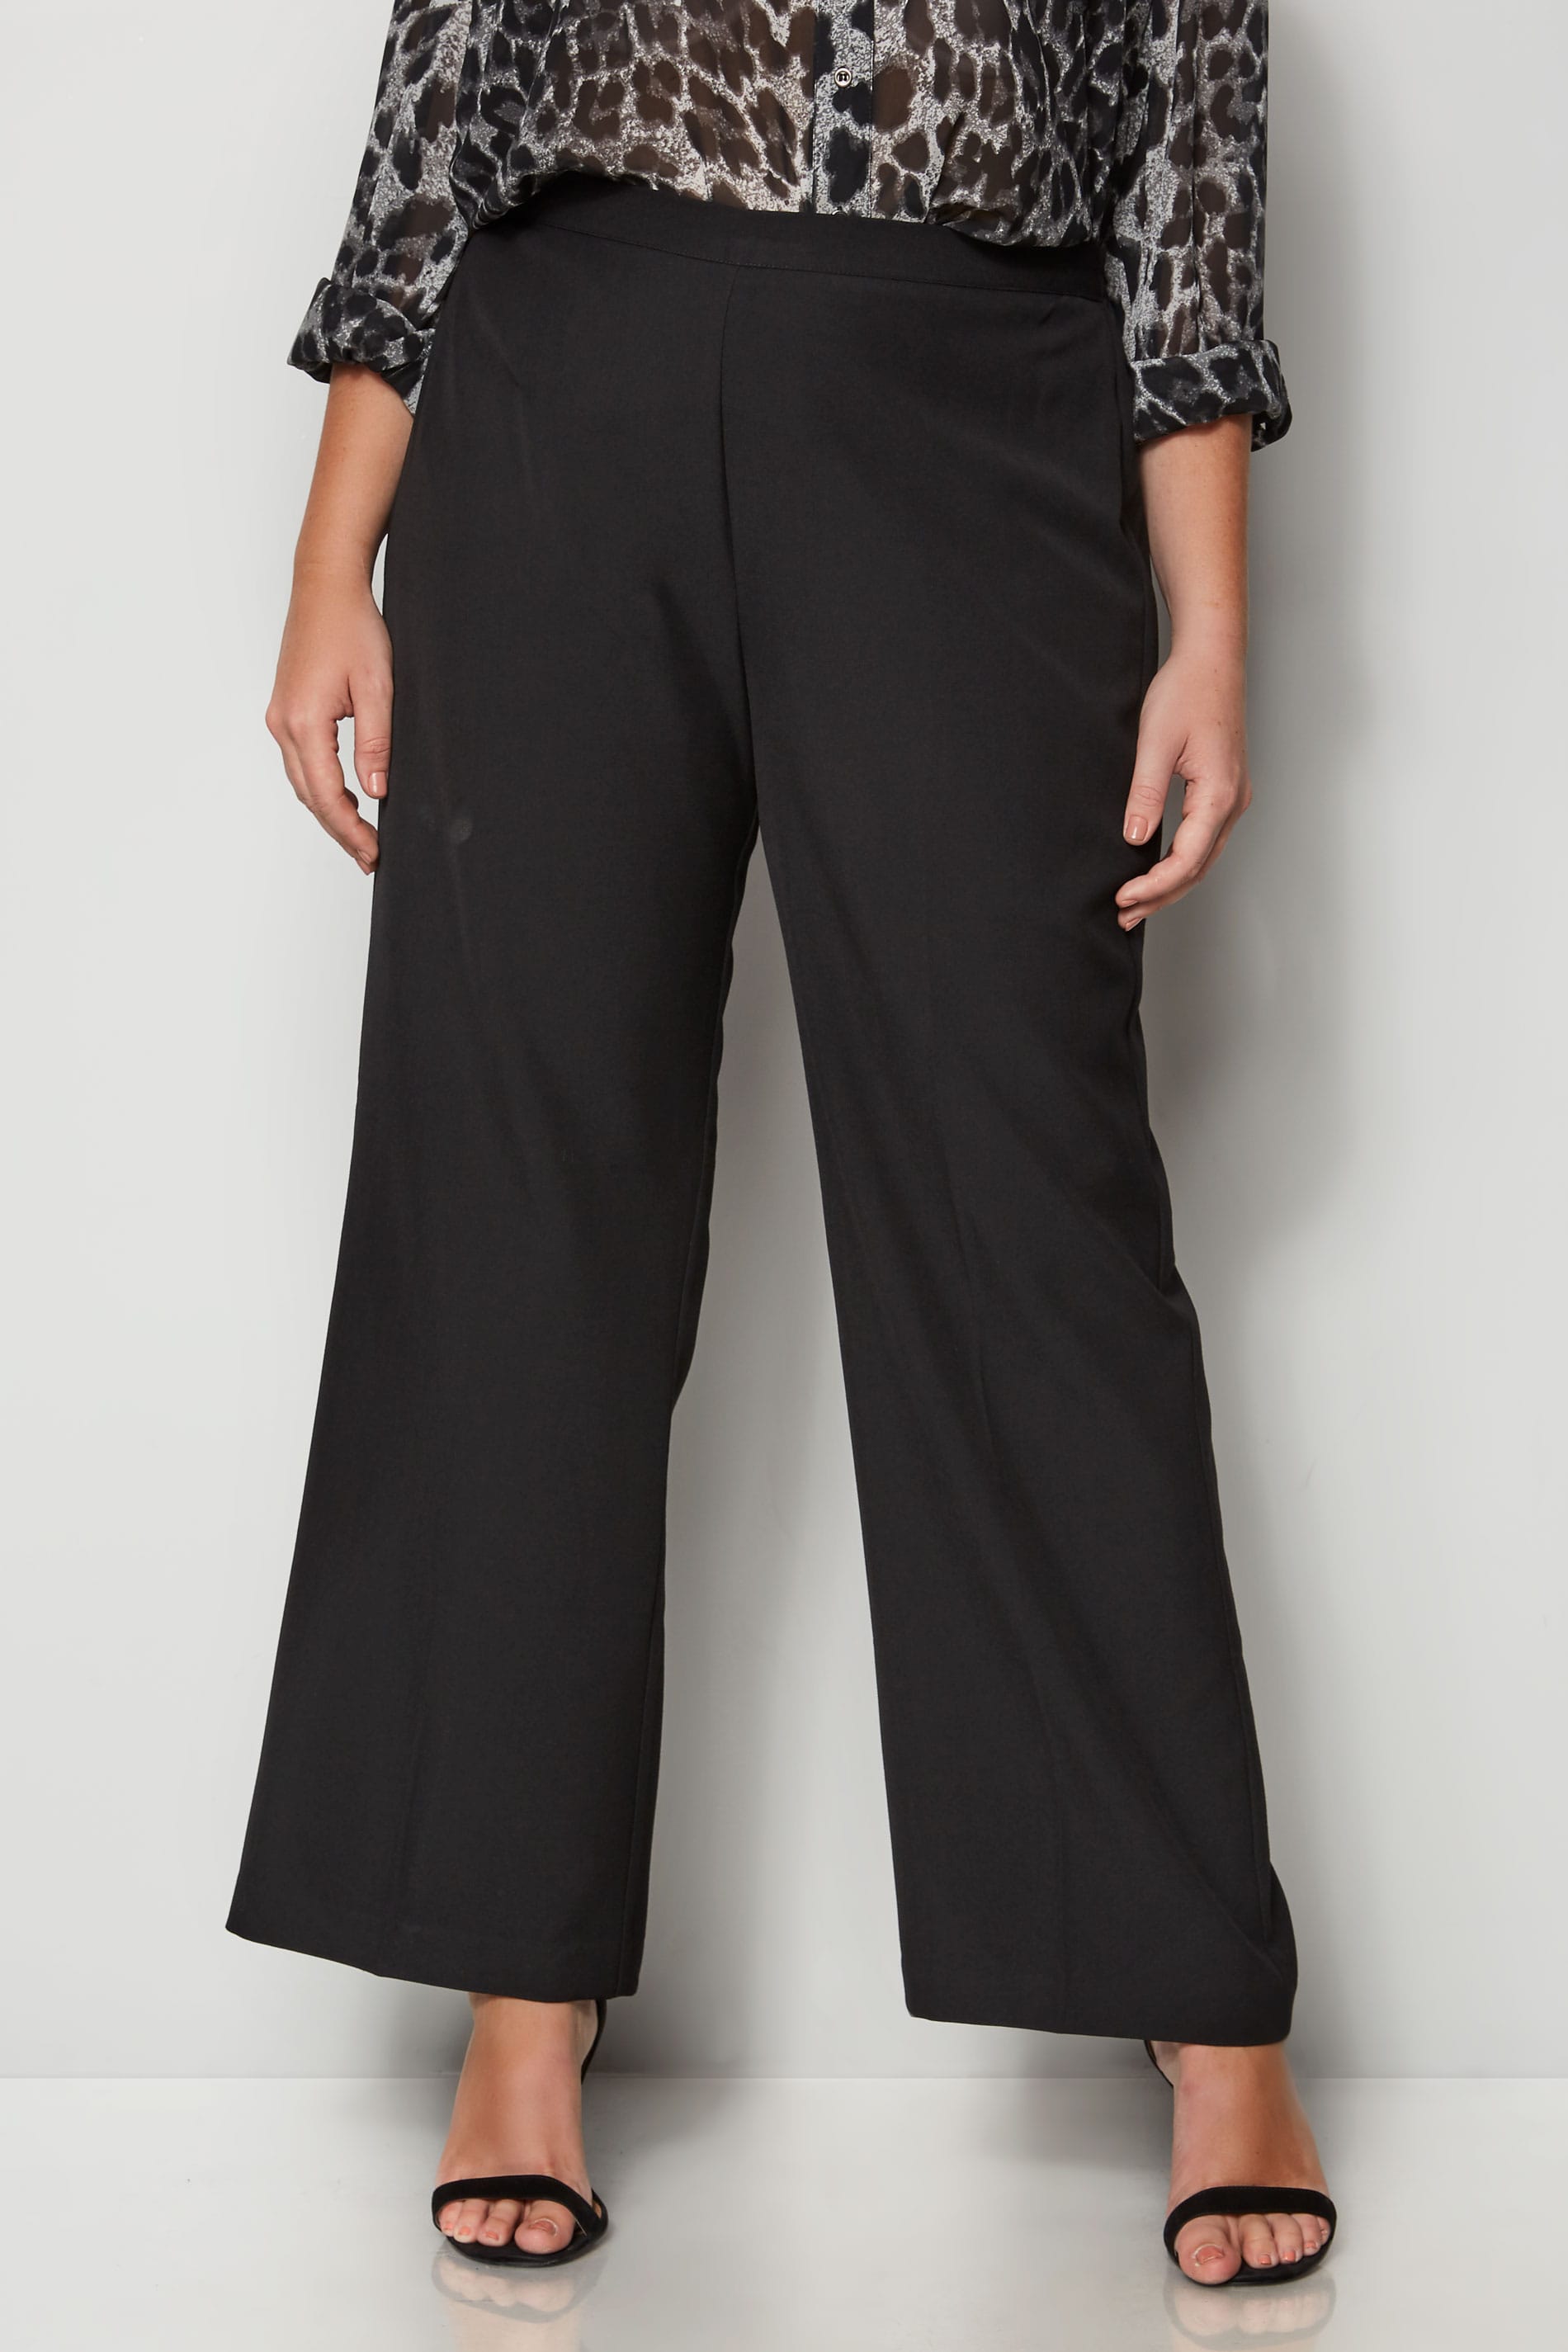 Black Classic Straight Leg Trousers With Elasticated Waistband - PETITE ...